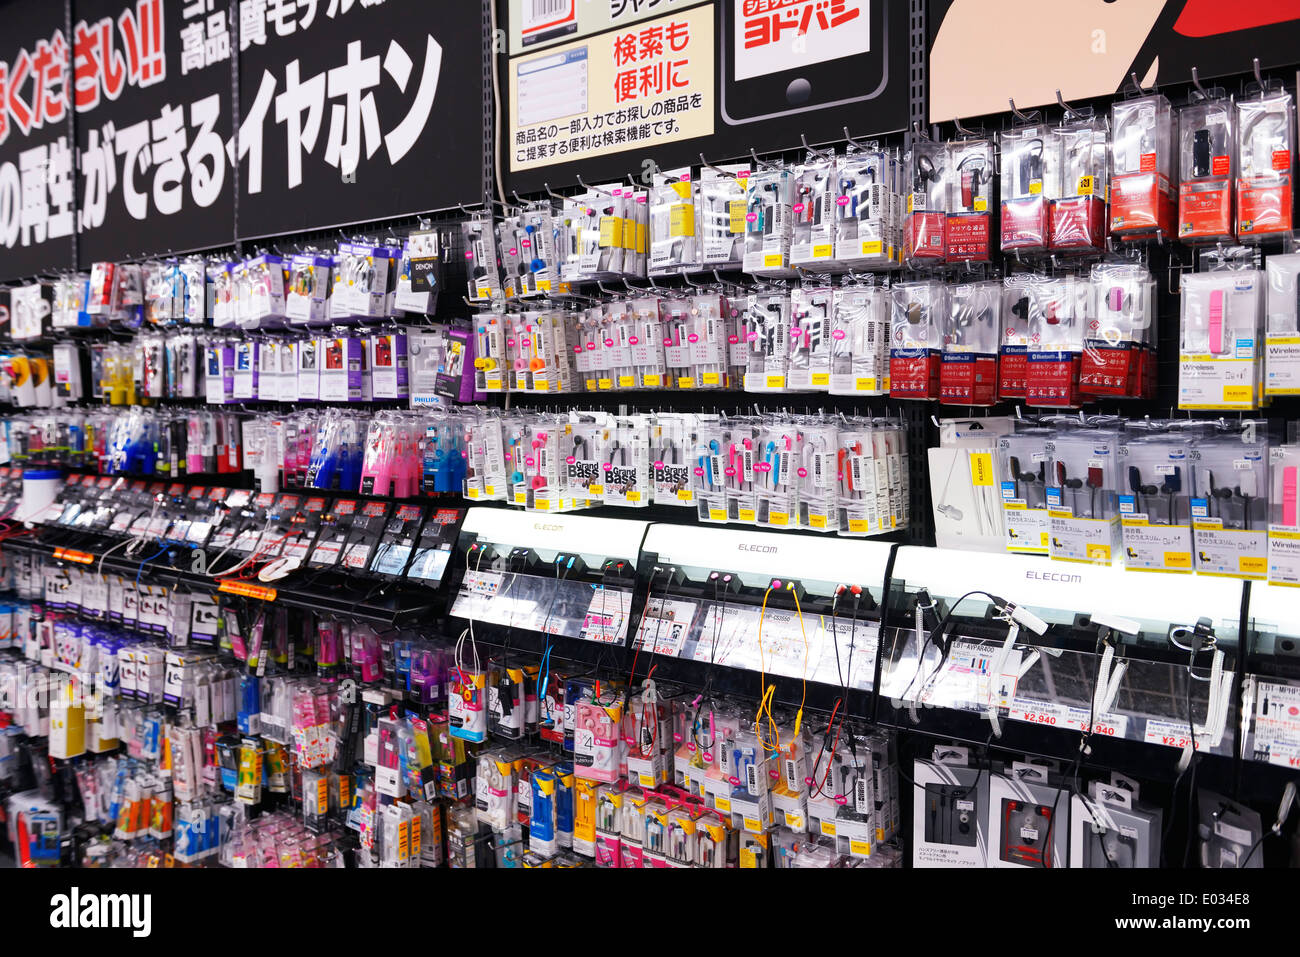 Cellphone accessories and earphones at electronics store Yodobashi Camera, Tokyo, Japan. Stock Photo